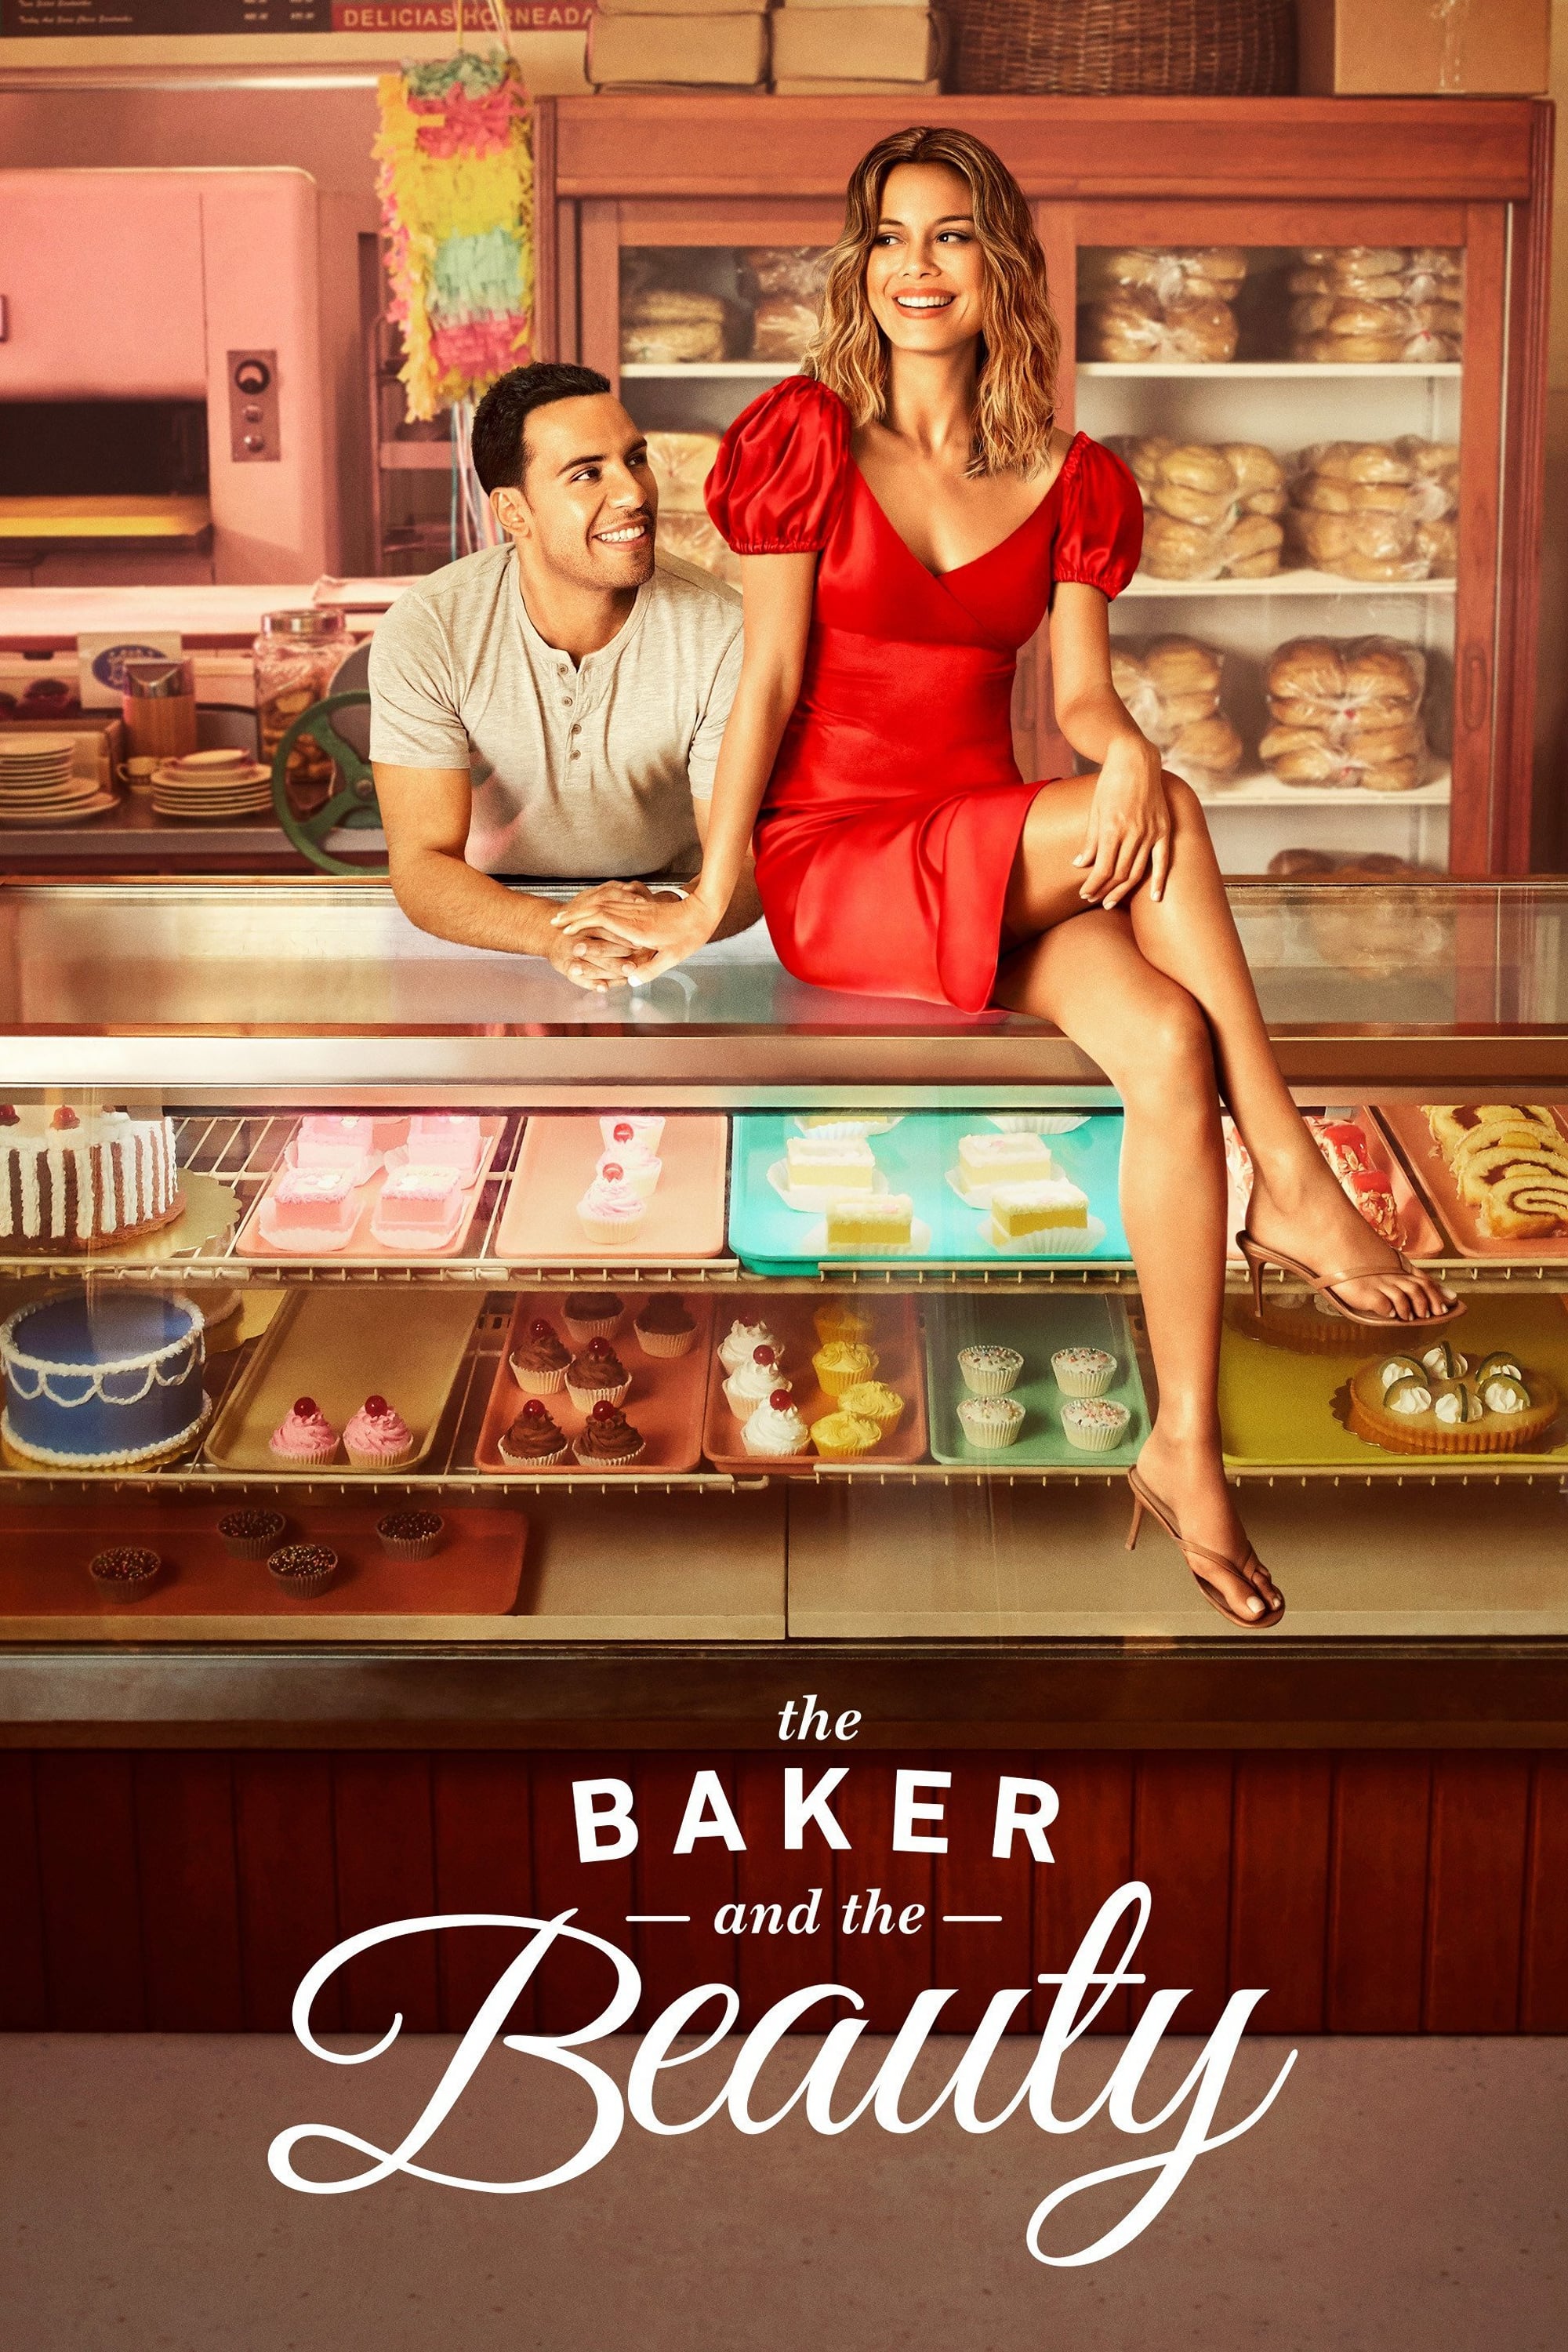 The Baker and the Beauty rating